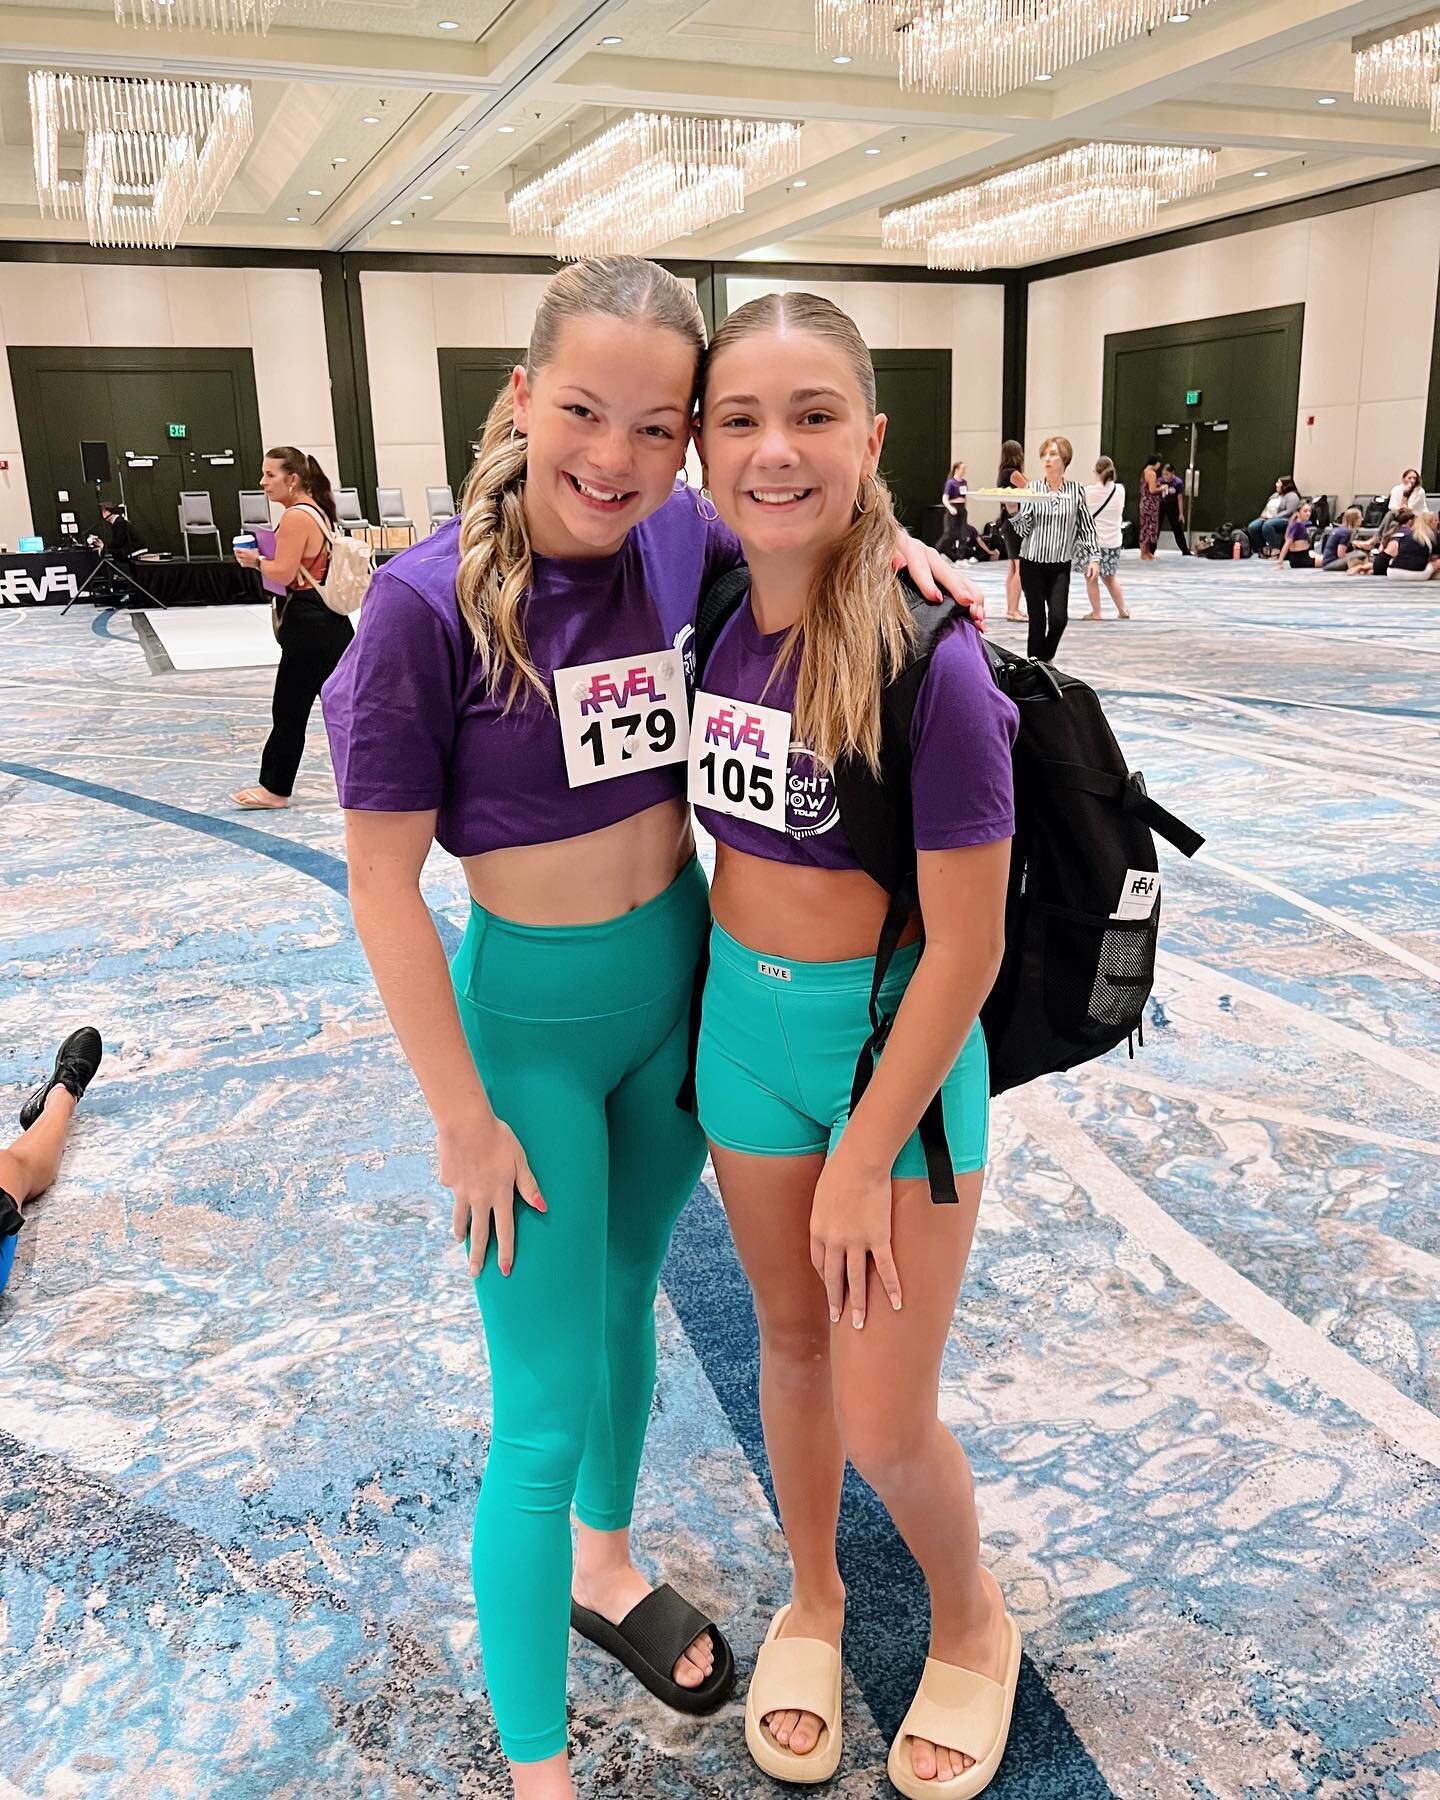 PRO-REVELERS in the house!!!🏠🤩🥳Shout out to Emerson &amp; Bennett who are in Florida for Pro-Reveler orientation! These ladies have the opportunity to travel and assist the faculty this season at @reveldanceconvention 🫶💕🦋We are so proud of you 